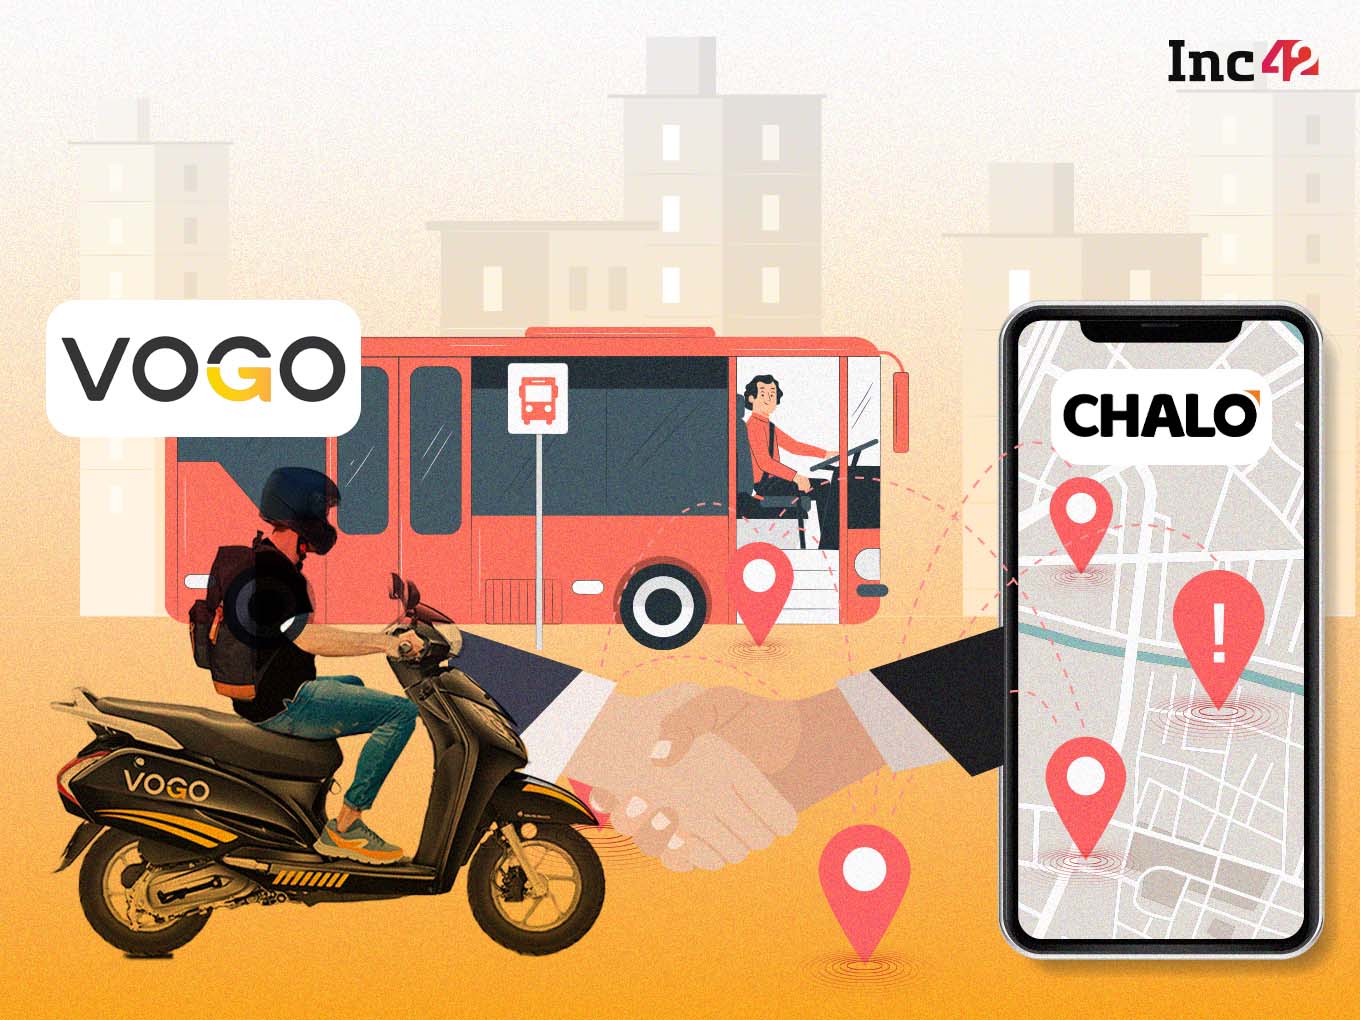 Mobility Startup Chalo Acquires Two-Wheeler Rental Platform Vogo To Offer Better Experience